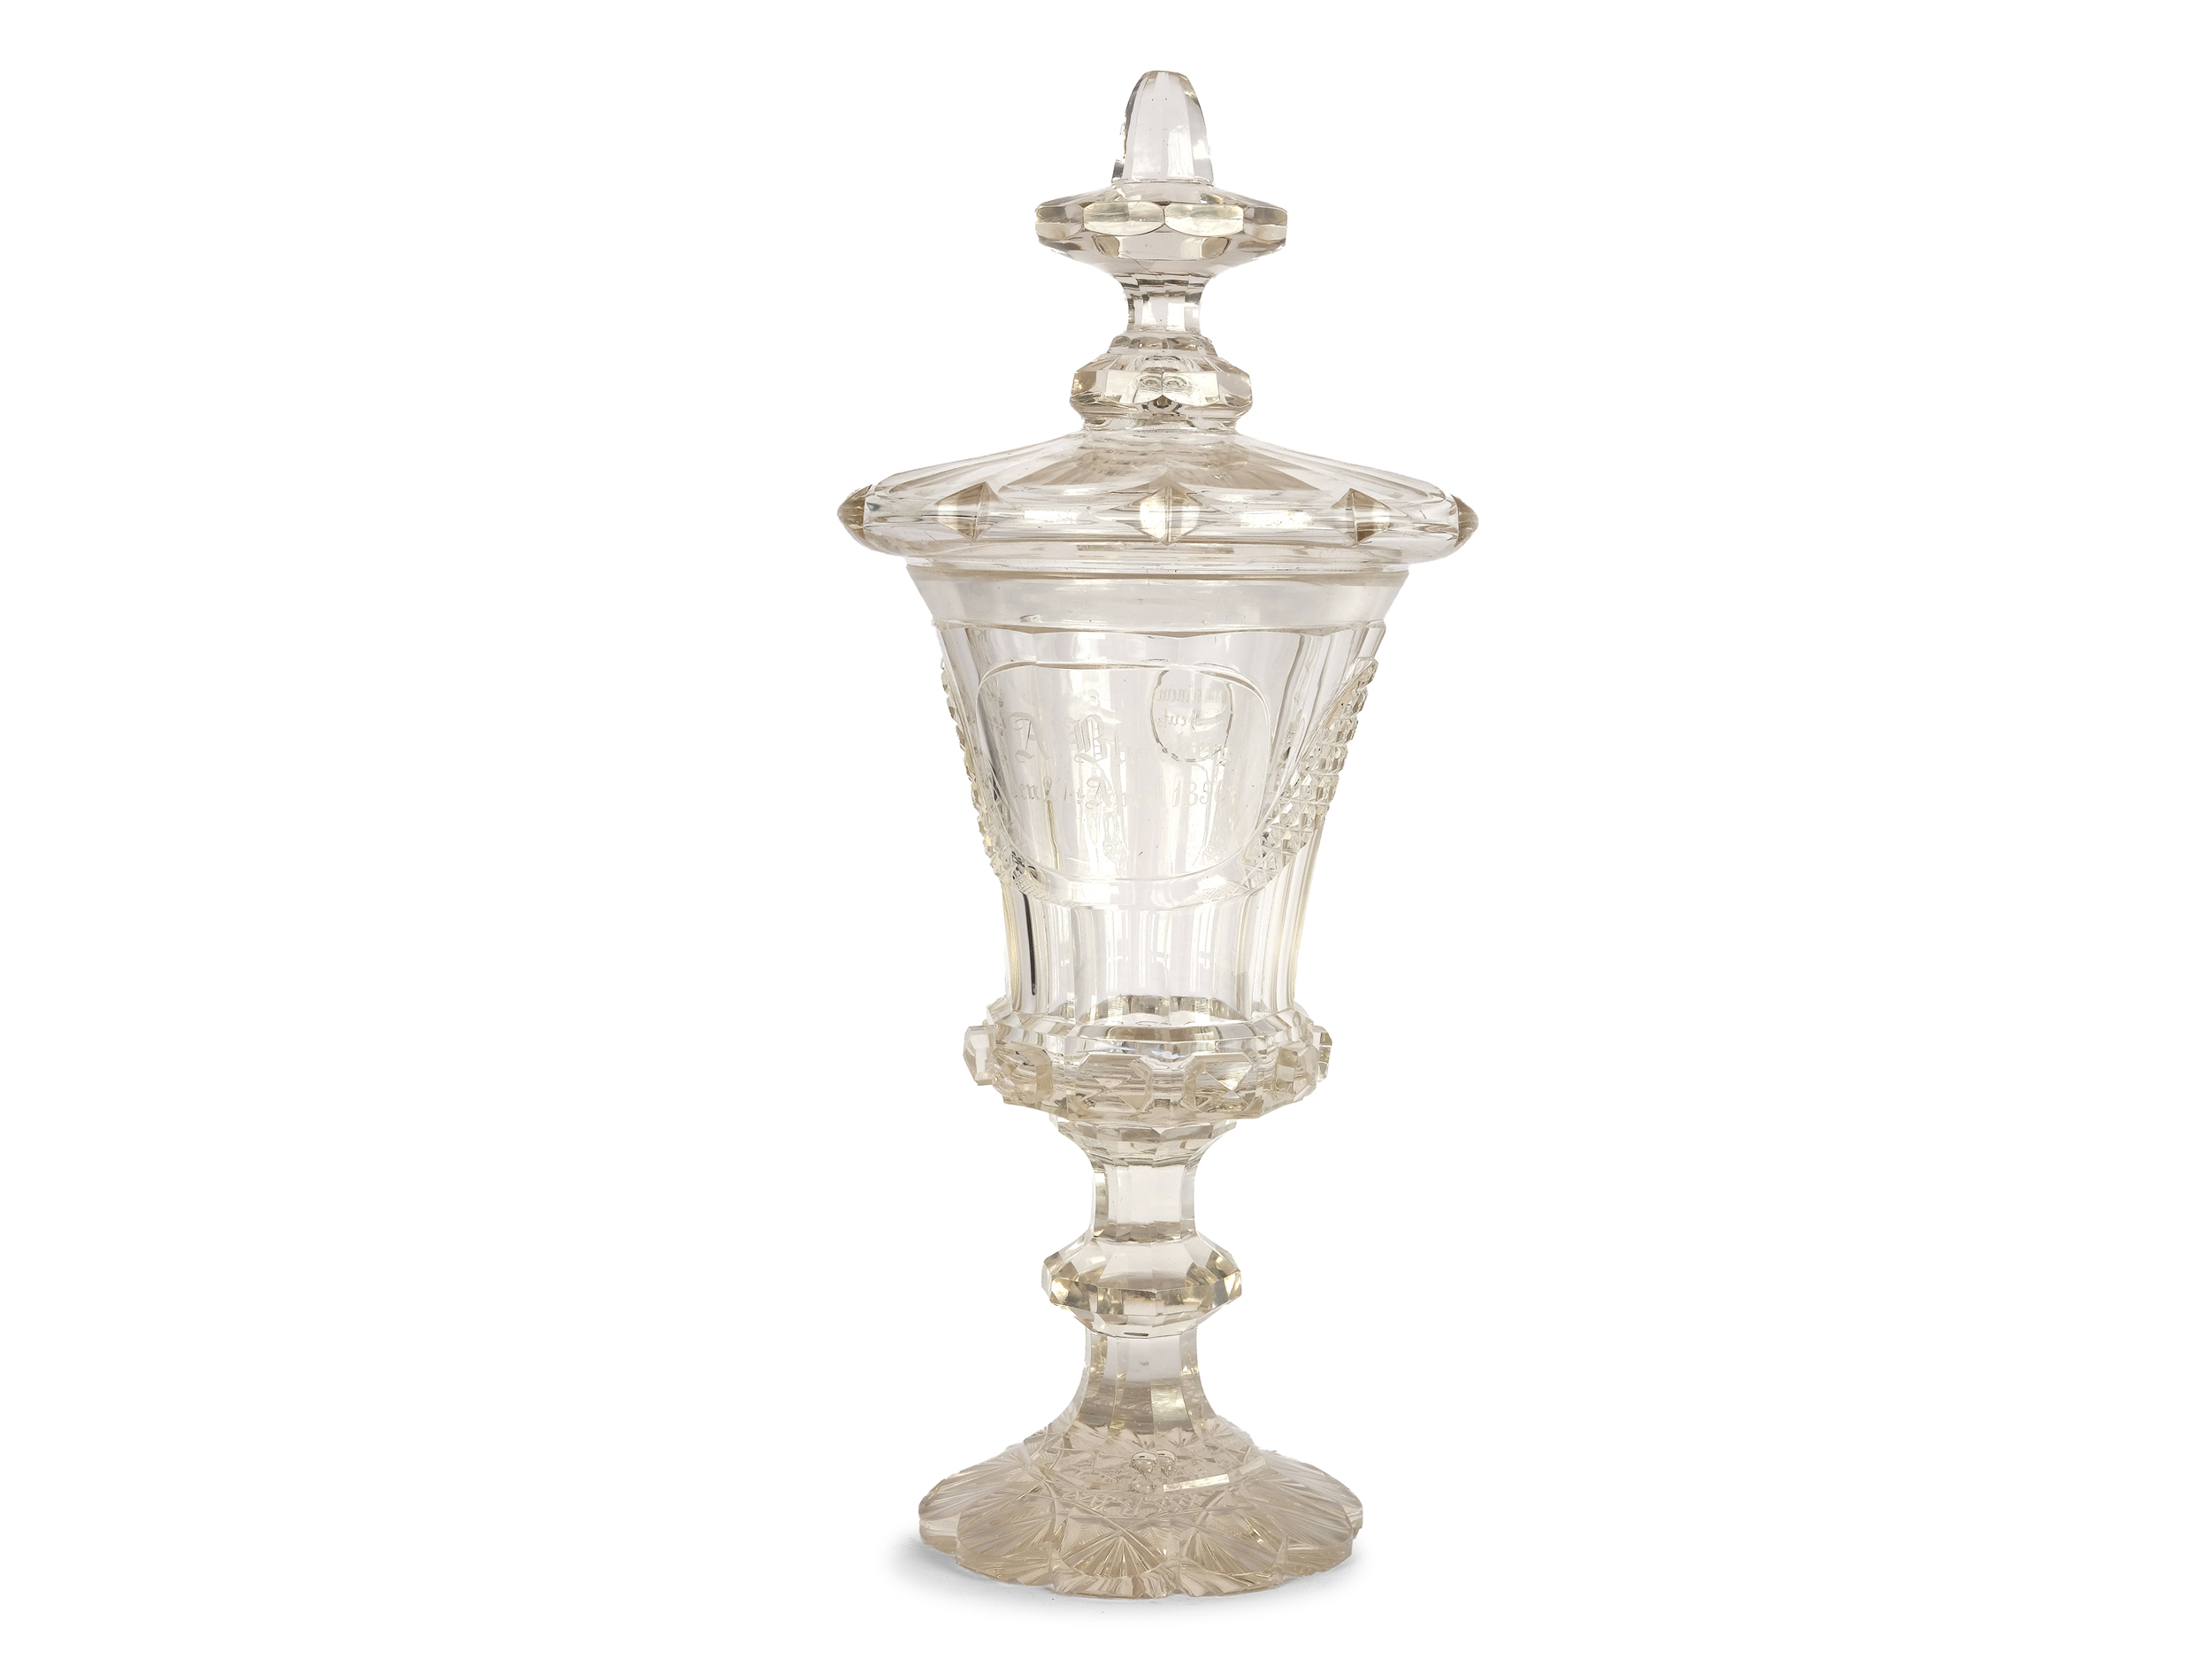 Lidded goblet, mid 19th century - Image 2 of 8